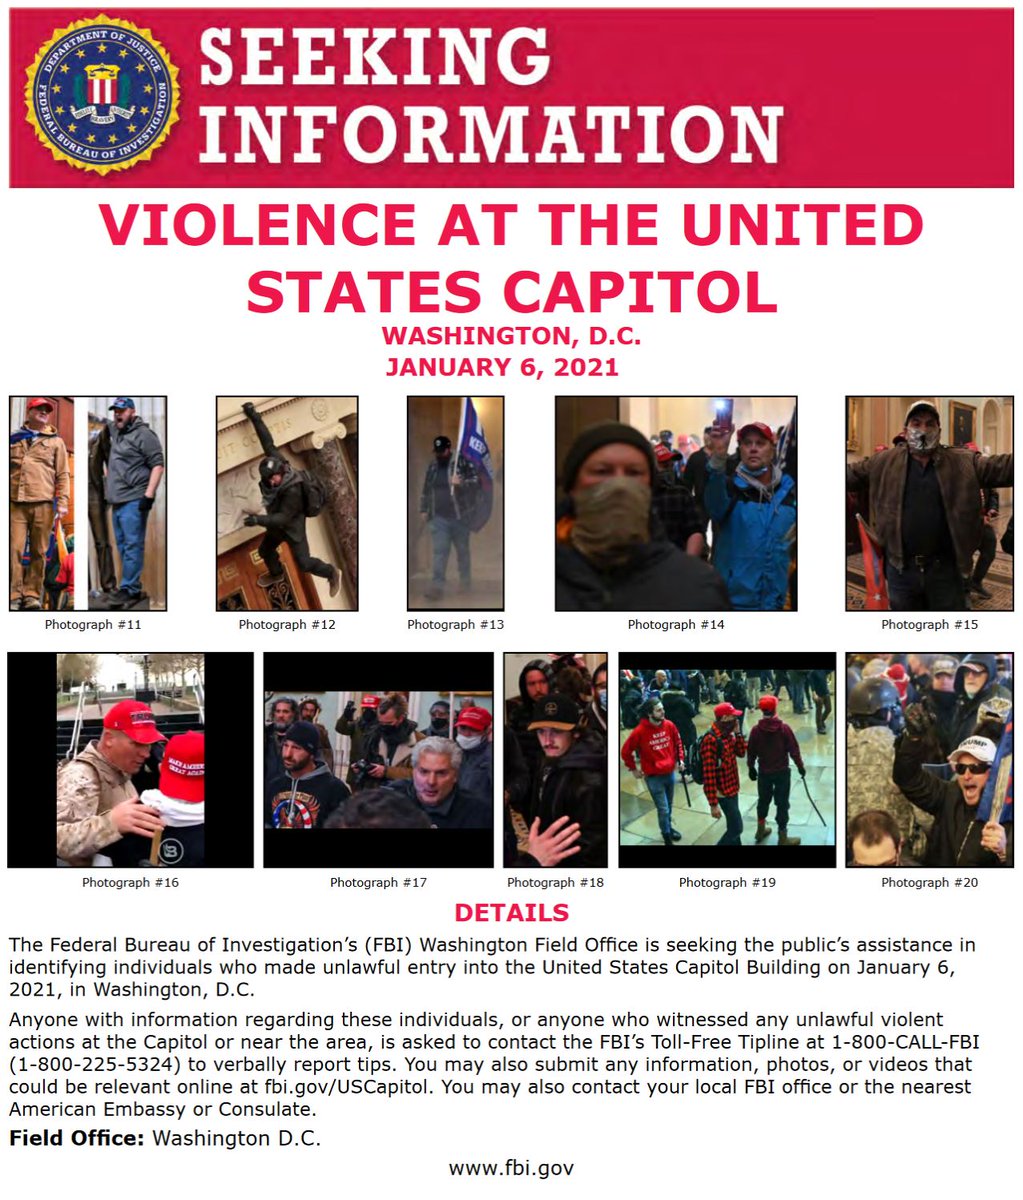 #FBIWFO is seeking the public's assistance in identifying those who made unlawful entry into U.S. Capitol Building on Jan. 6. If you witnessed unlawful violent actions contact the #FBI at 1-800-CALL-FBI or submit photos/videos at fbi.gov/USCapitol. fbi.gov/wanted/seeking…